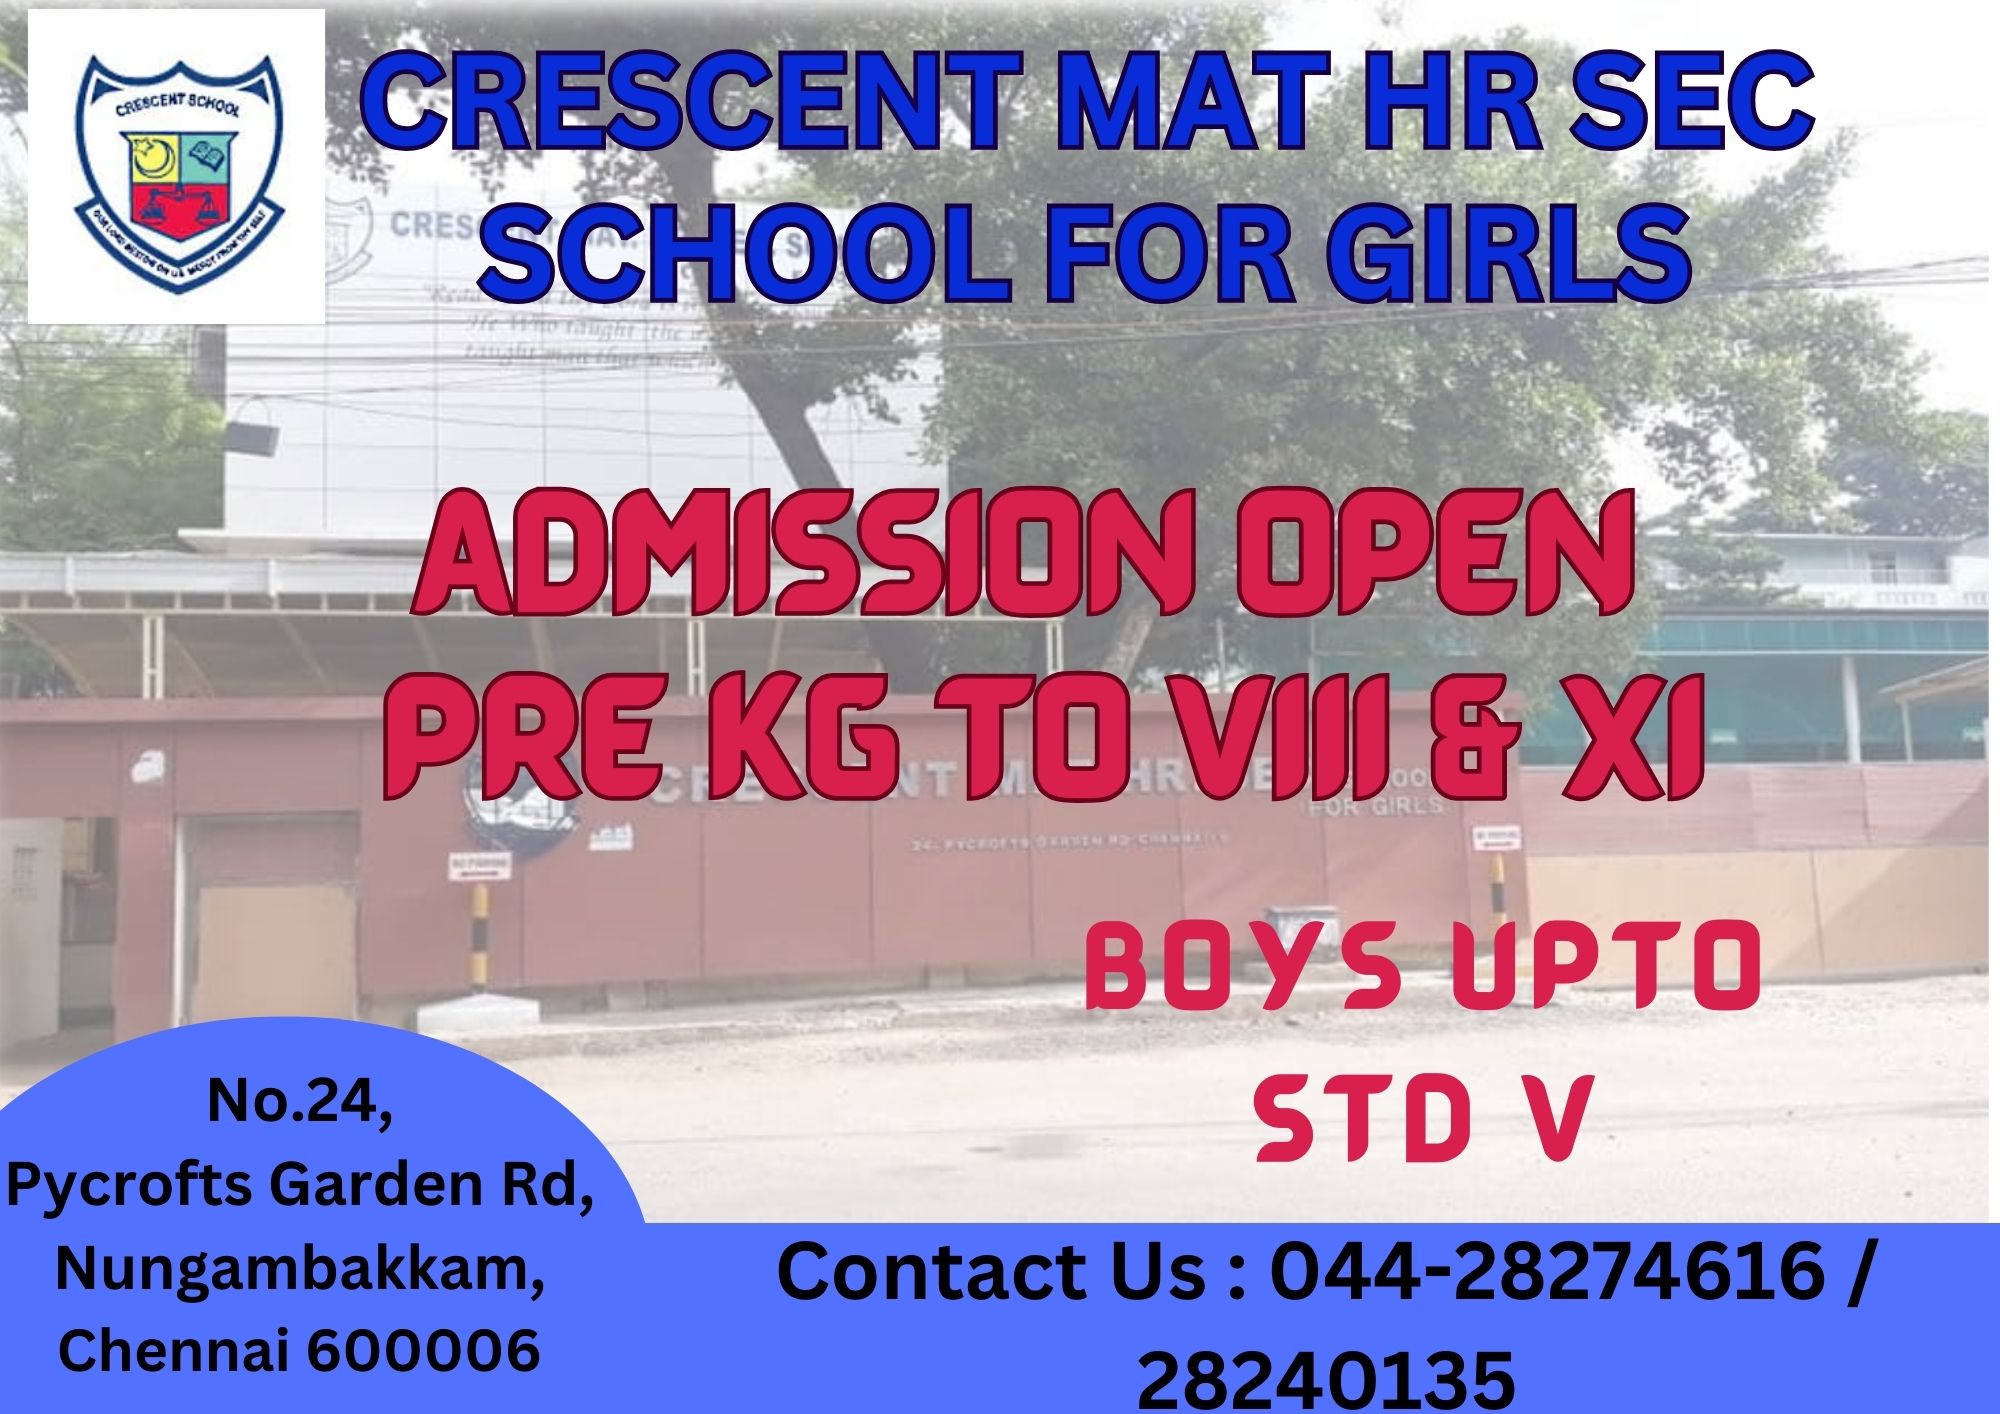 ADMISSION FOR CLASSES PREKG TO VIII & XI